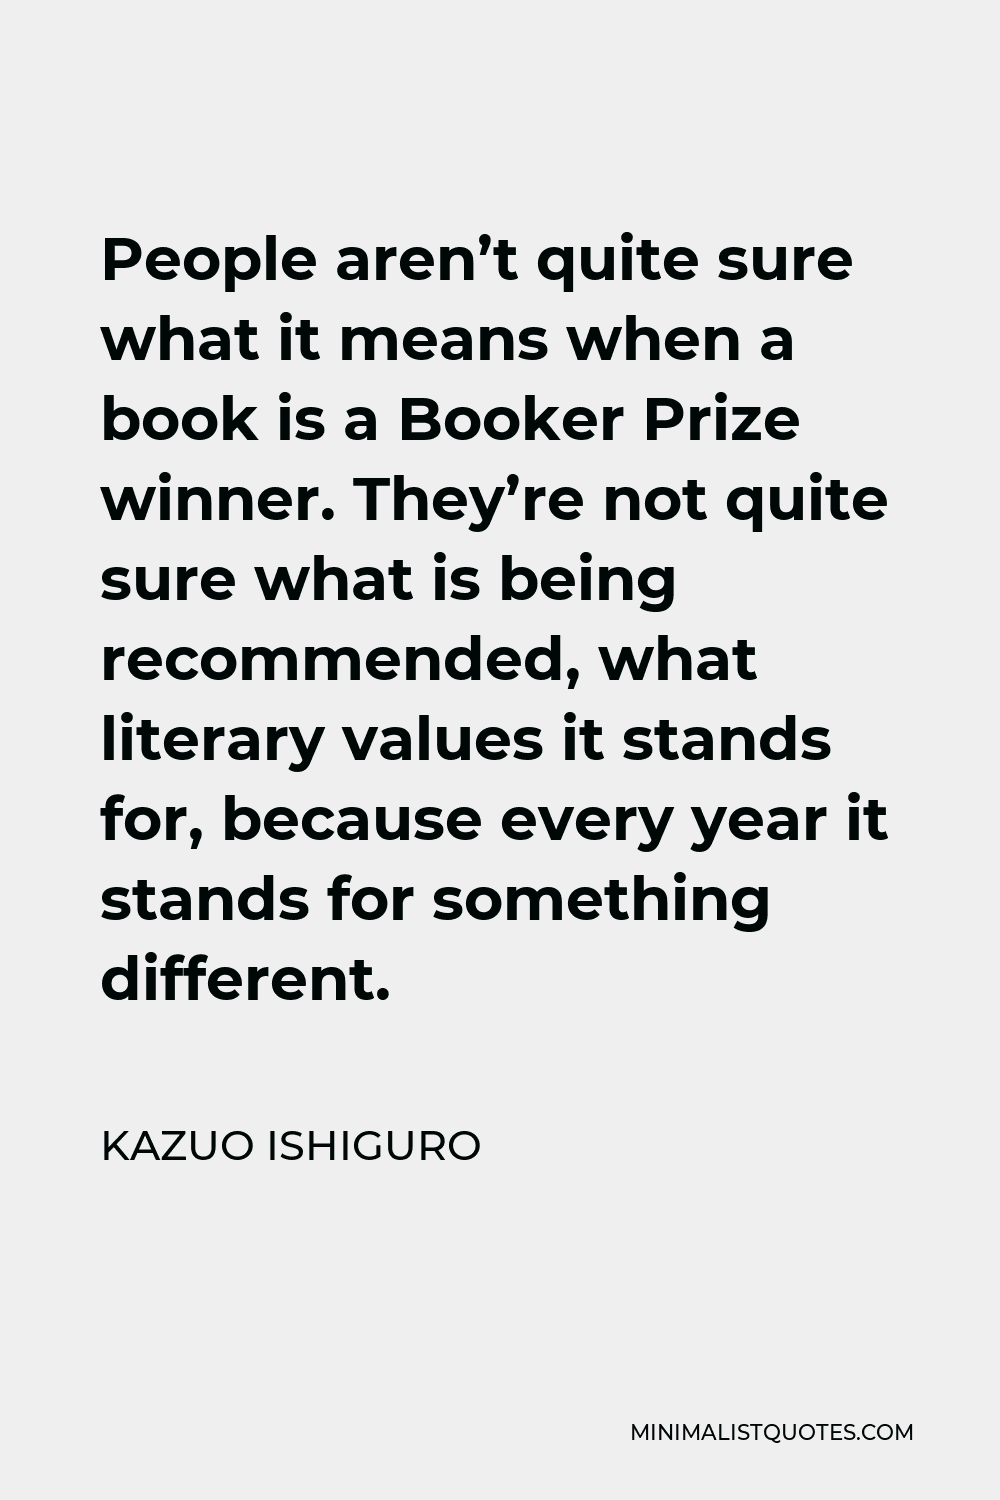 Kazuo Ishiguro Quote - People aren’t quite sure what it means when a book is a Booker Prize winner. They’re not quite sure what is being recommended, what literary values it stands for, because every year it stands for something different.